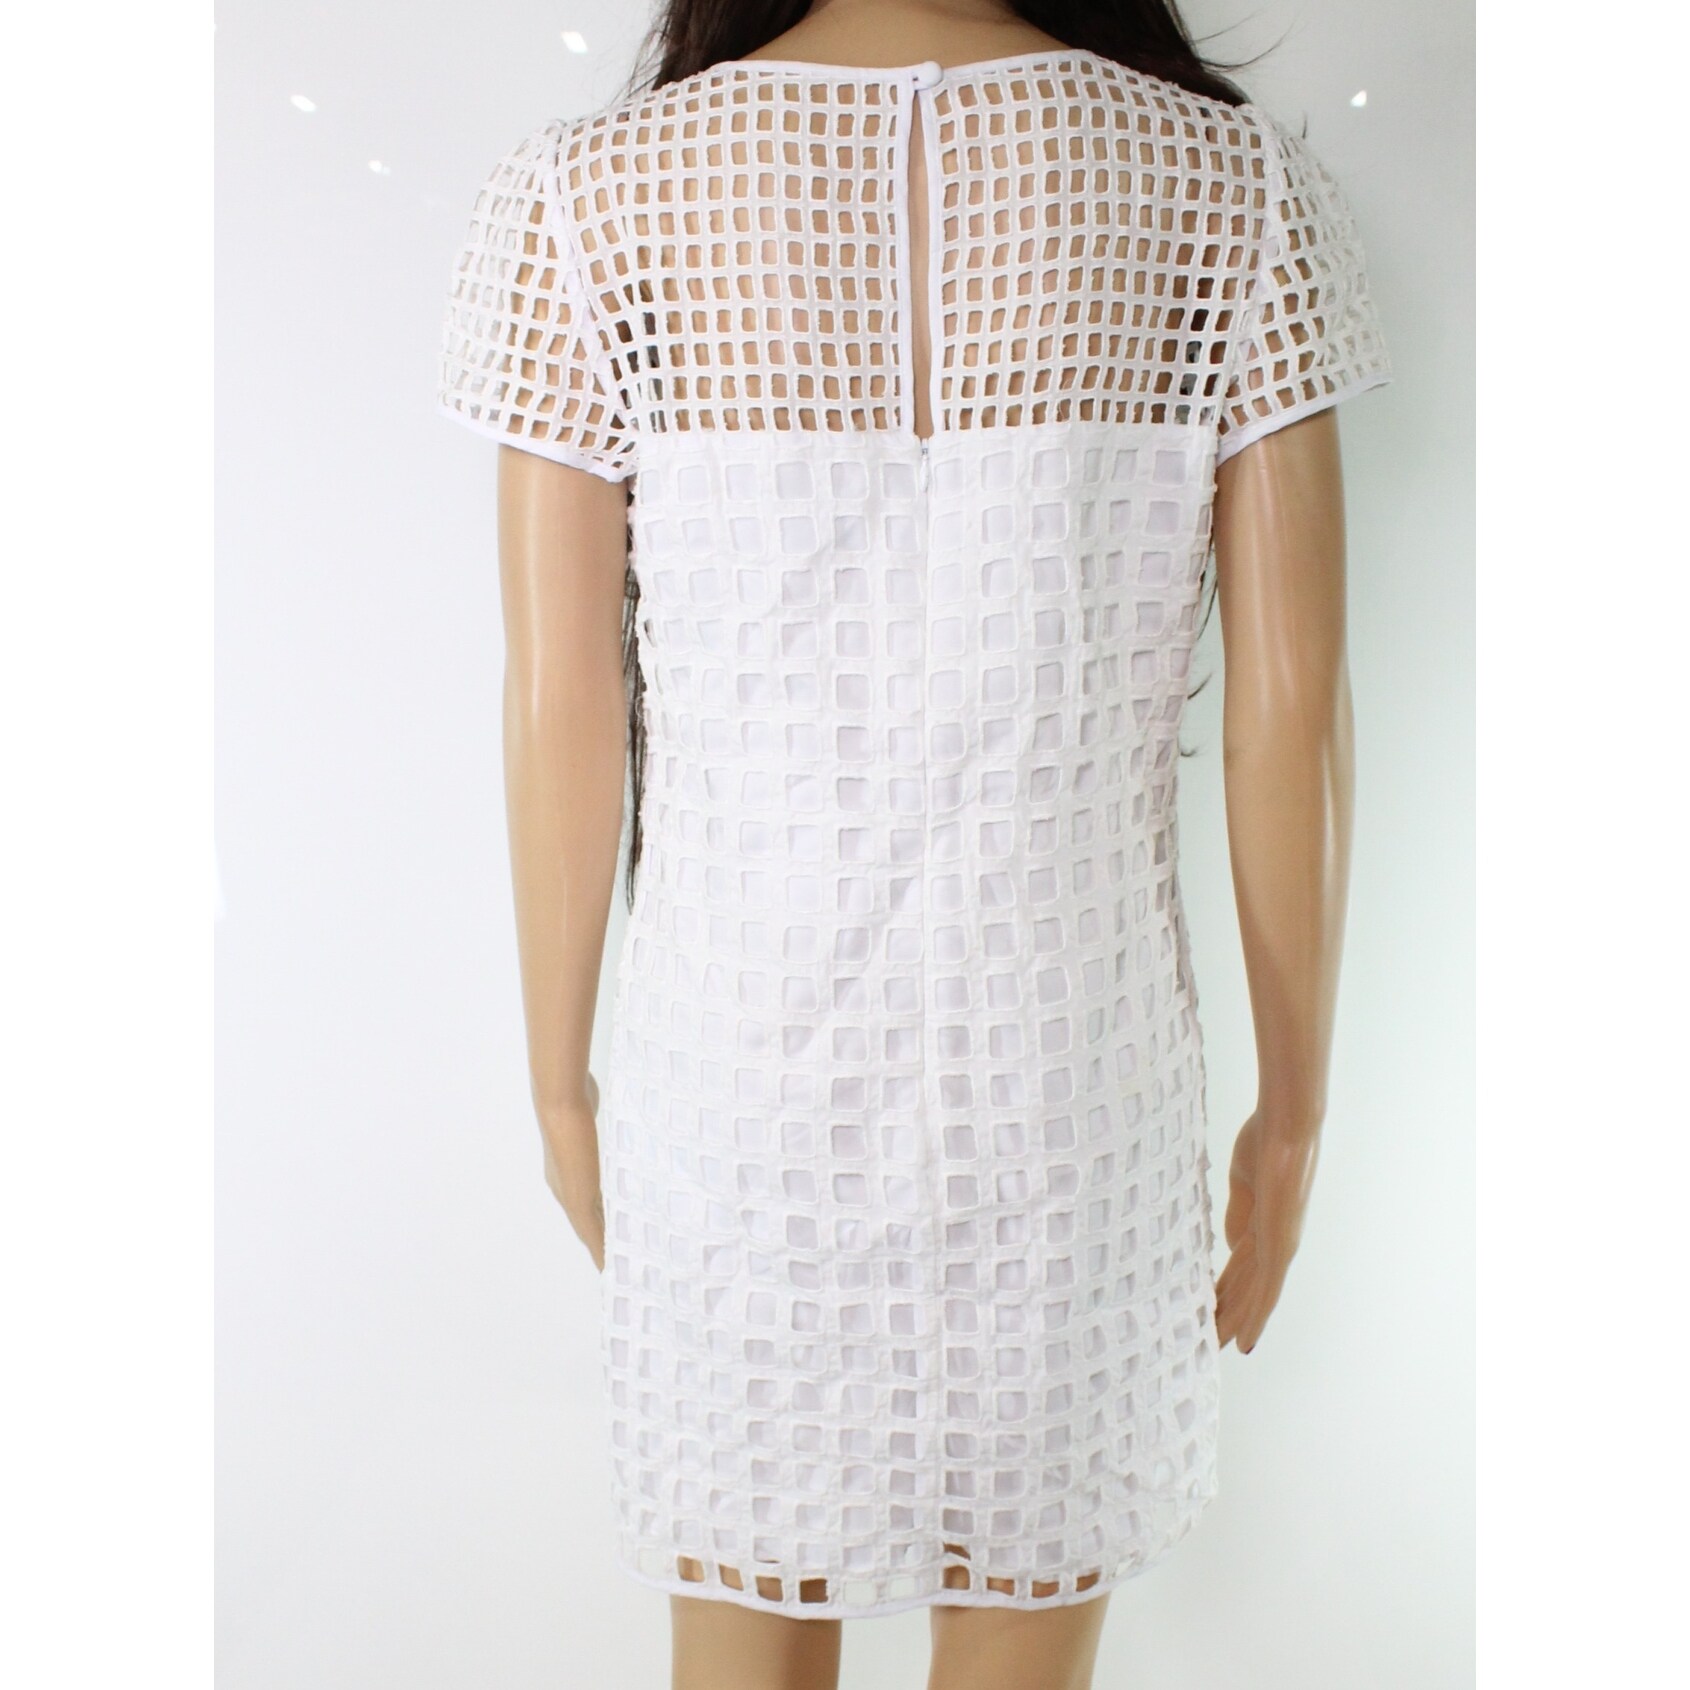 milly white lace dress